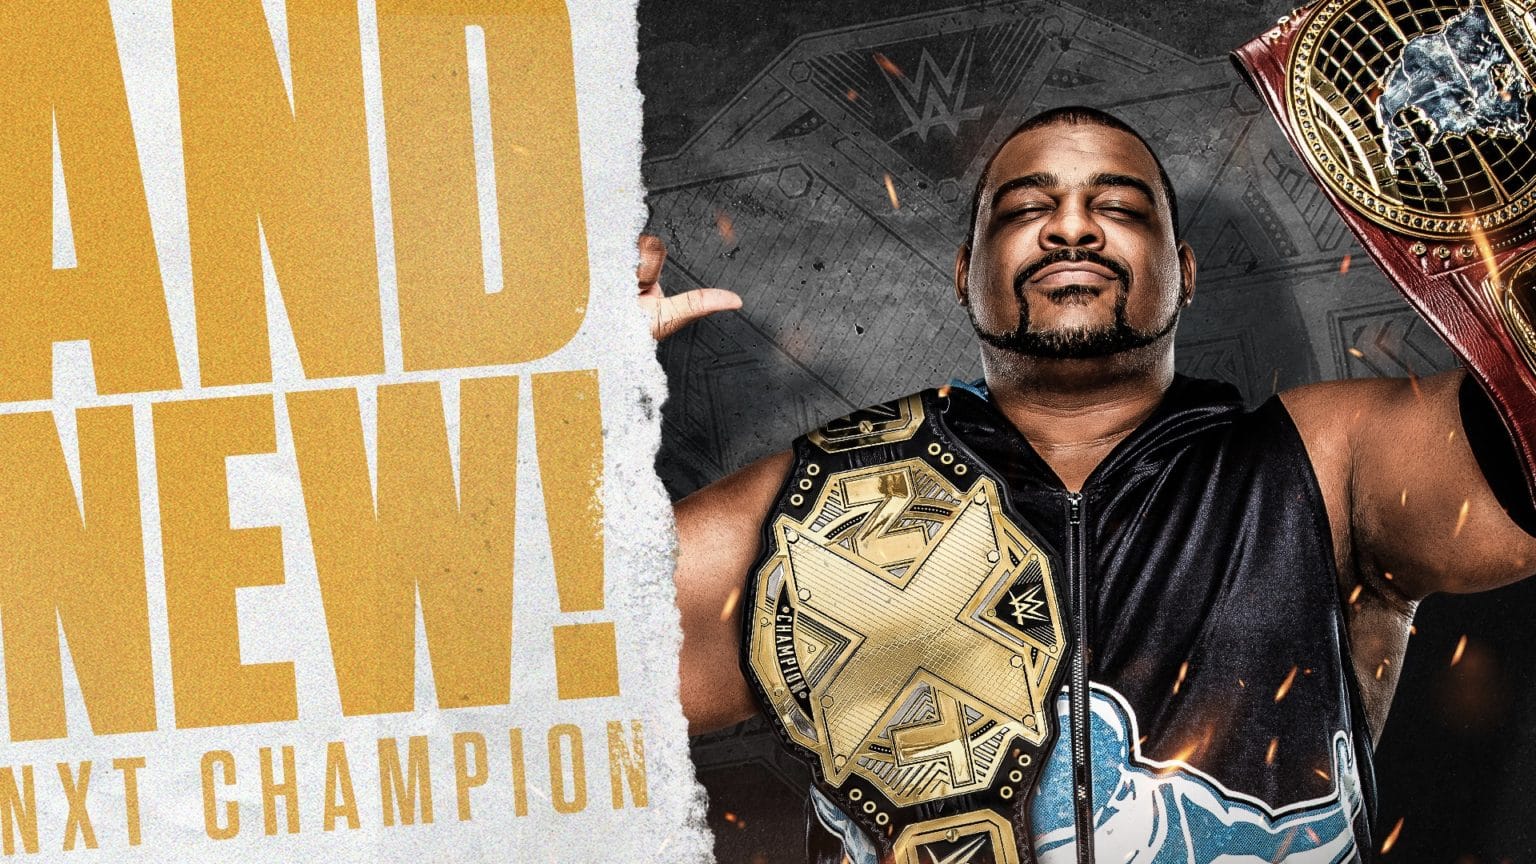 Keith Lee WWE NXT Champion and NXT North American Champion